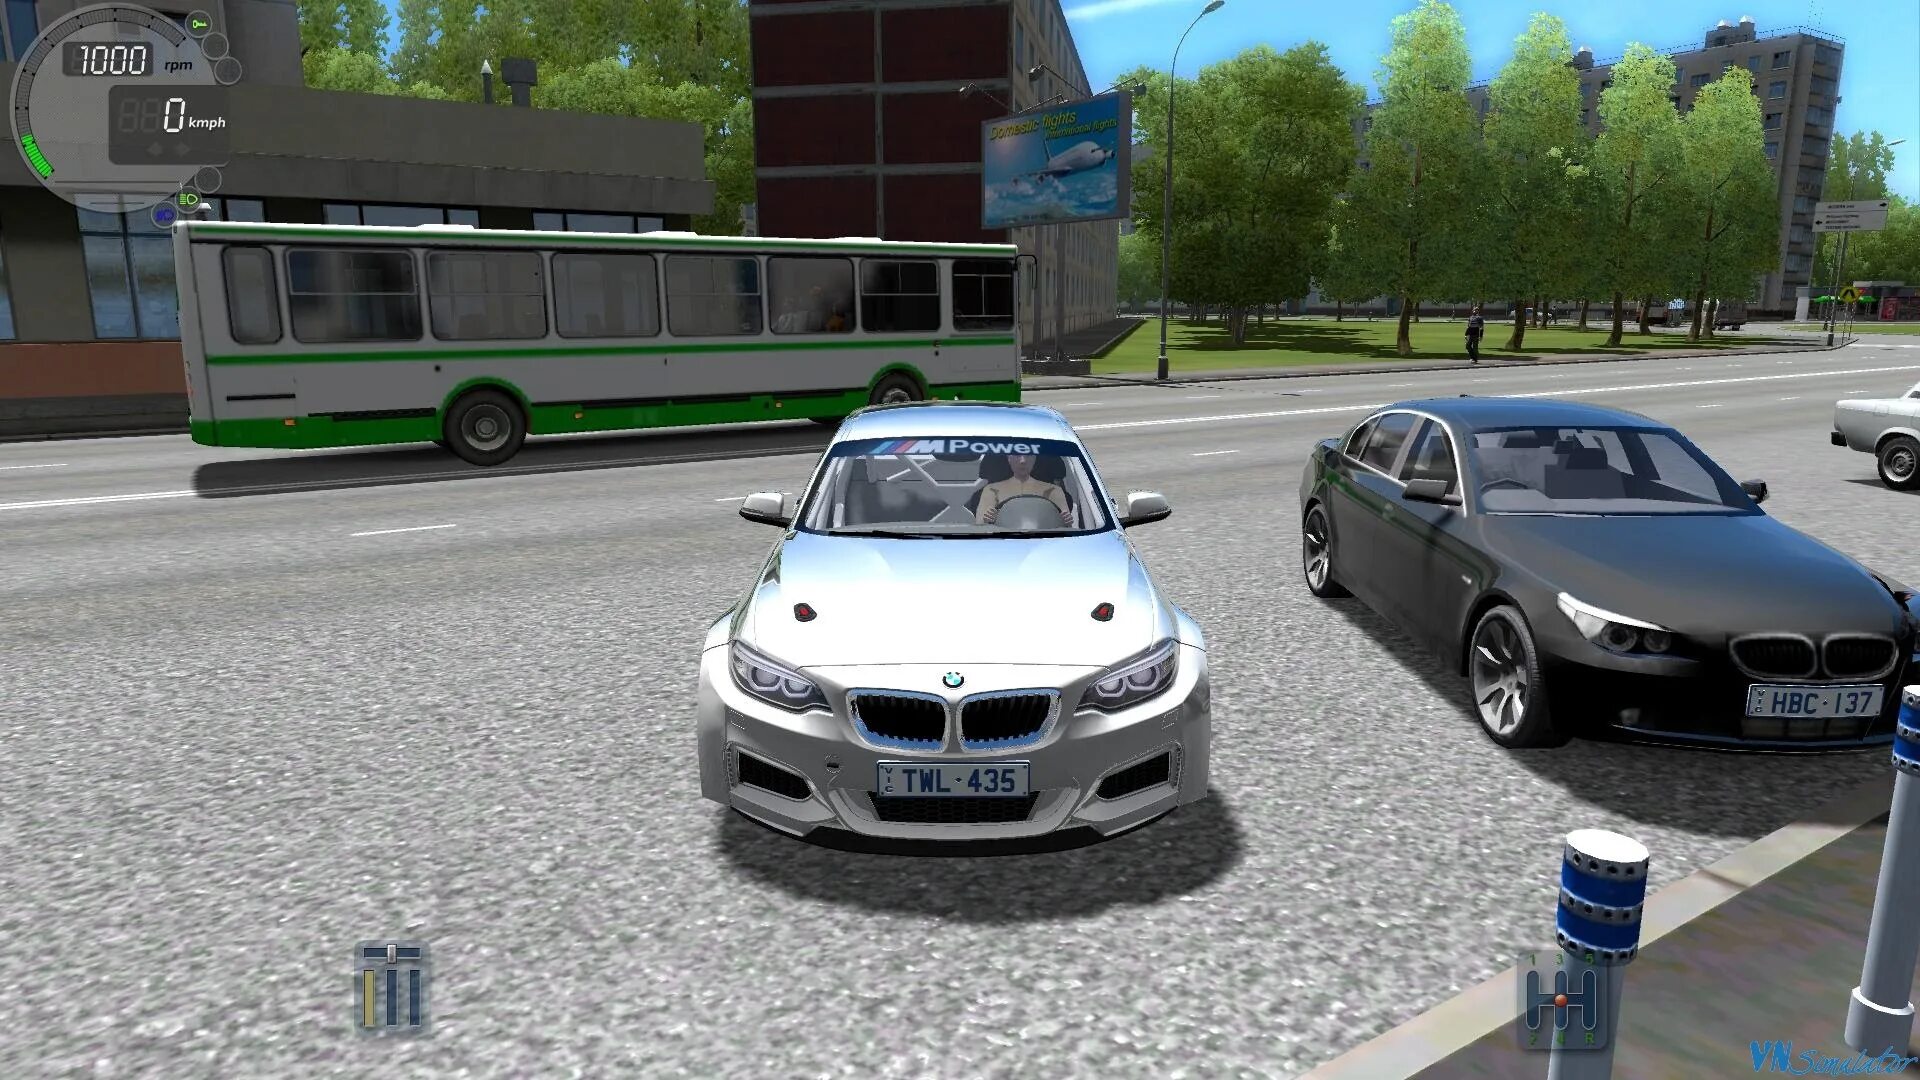 Msvcp110 city car driving. Сити кар драйвинг 1 4 1. City car Driving 1.2.1. City car Driving 1.4.1. BMW 580 I City car Driving.